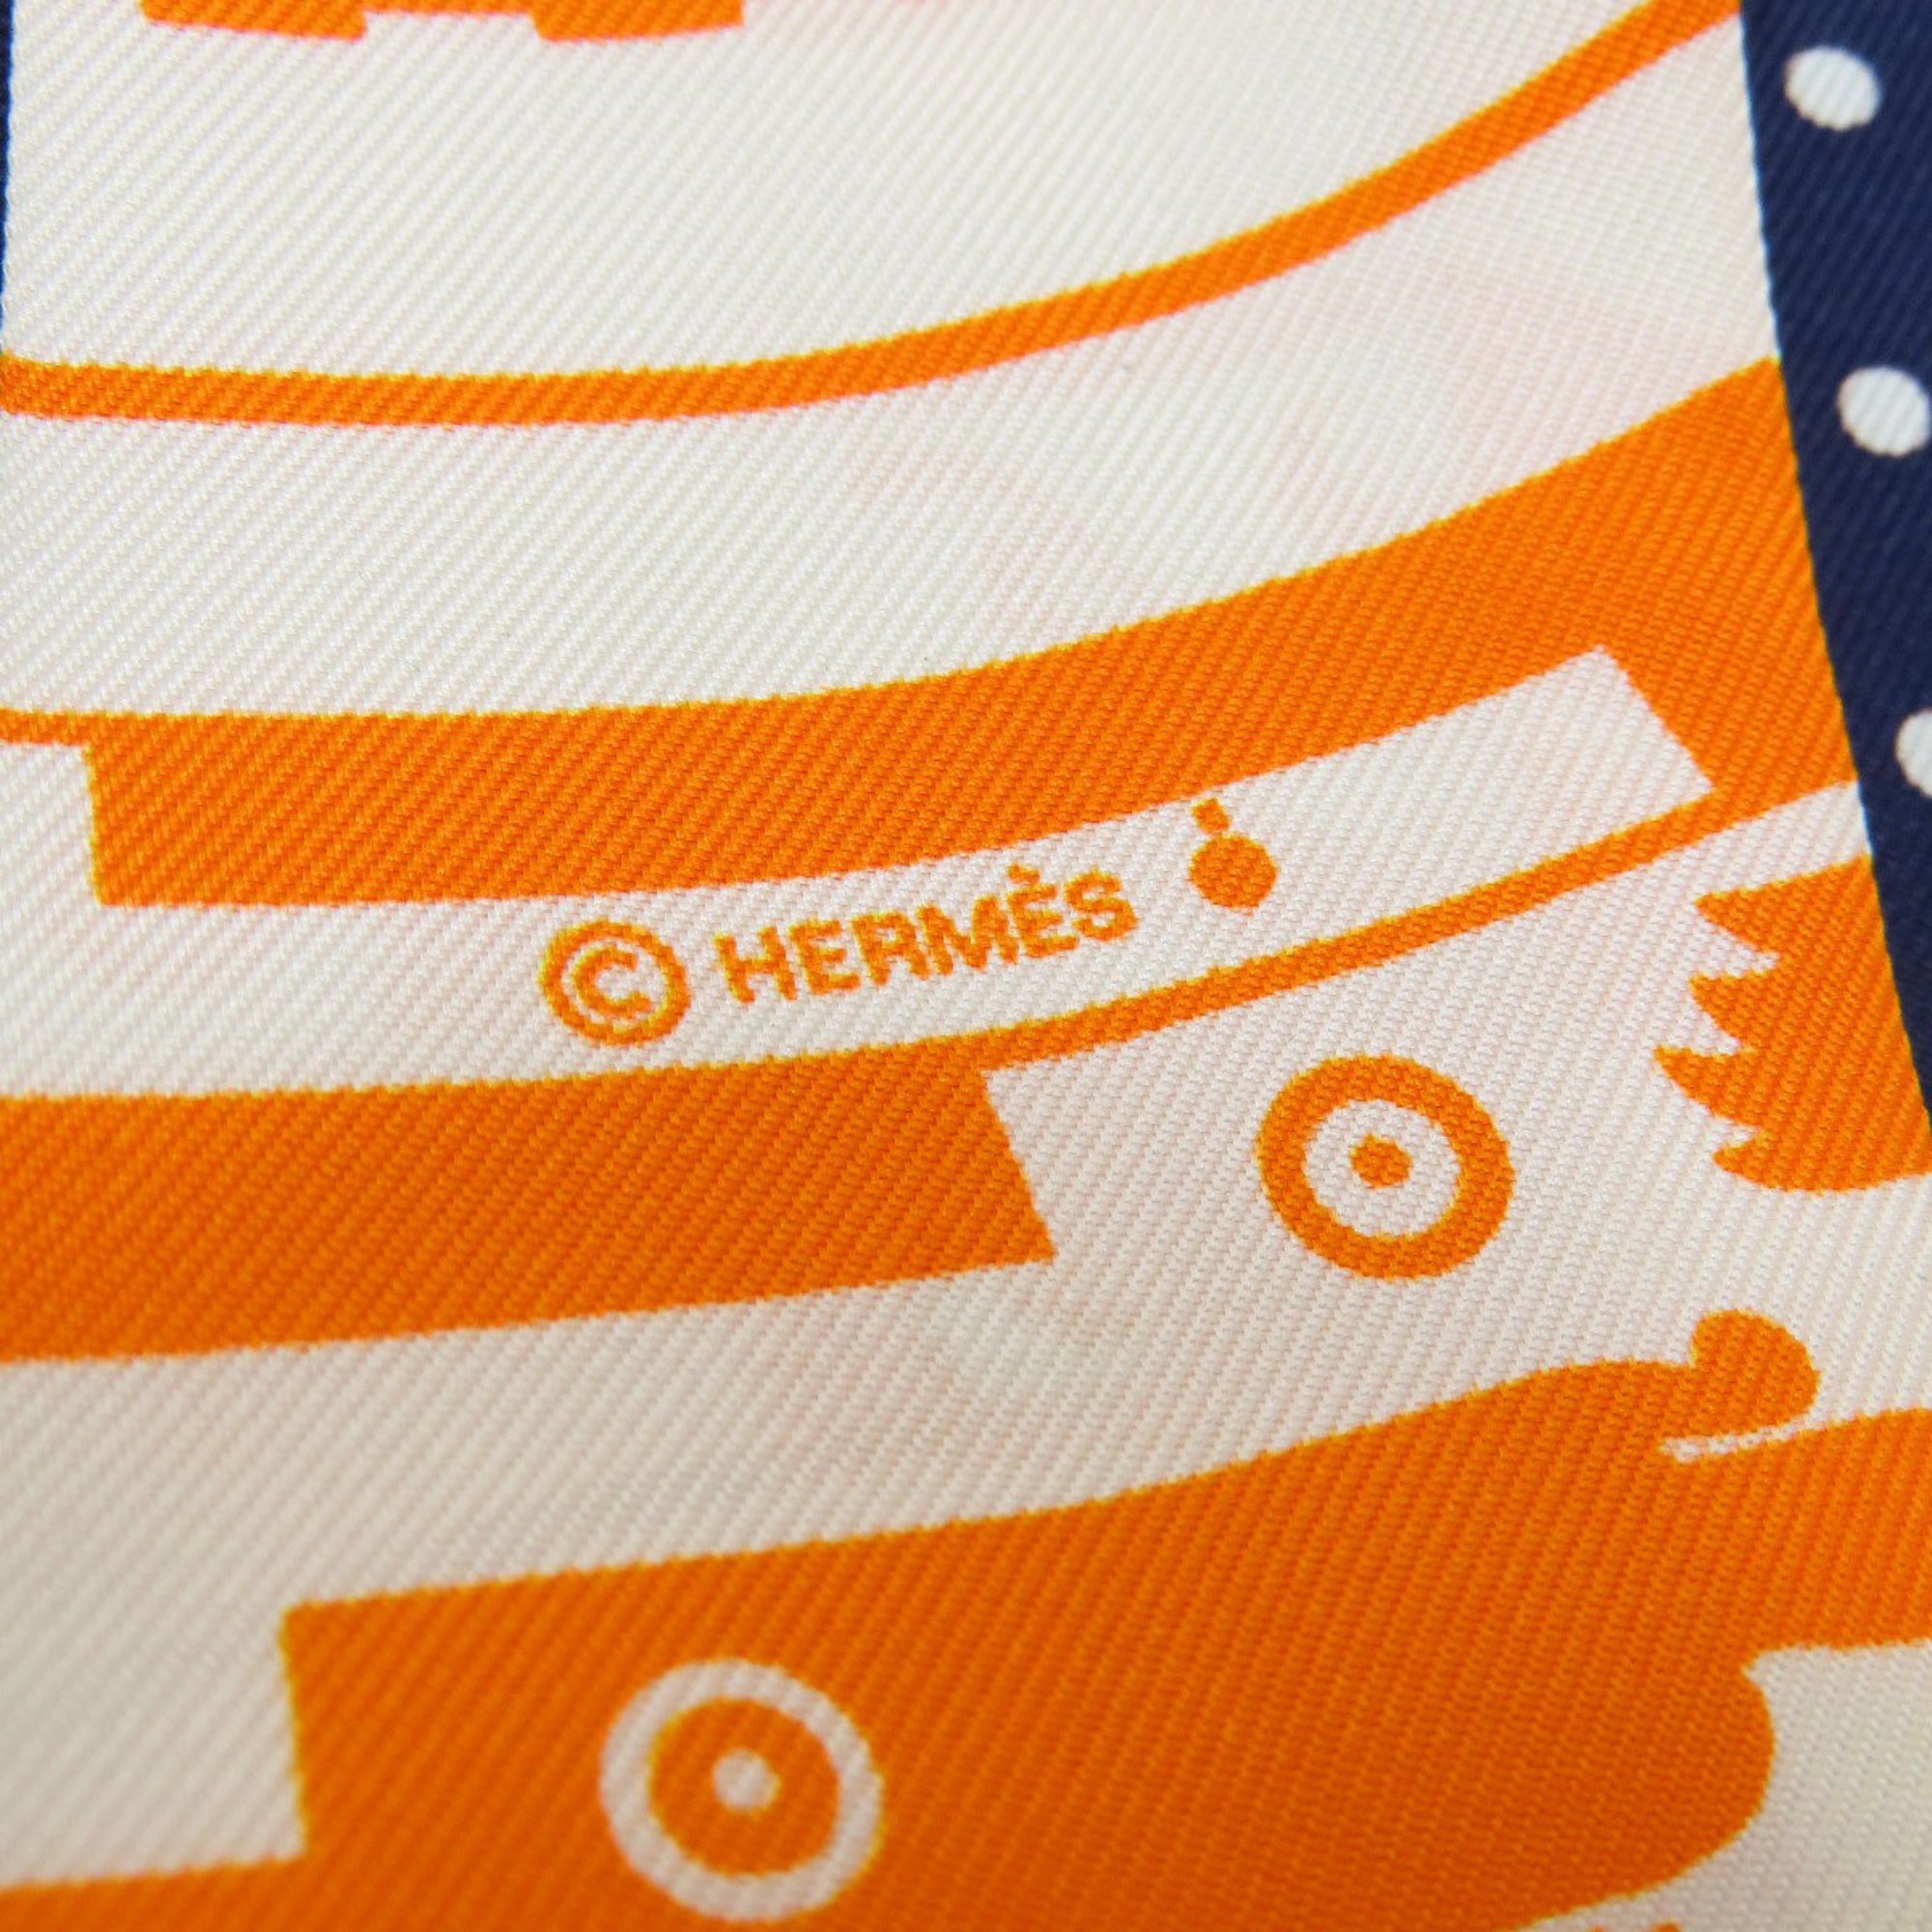 Hermes Twilly Scarf Silk for Women